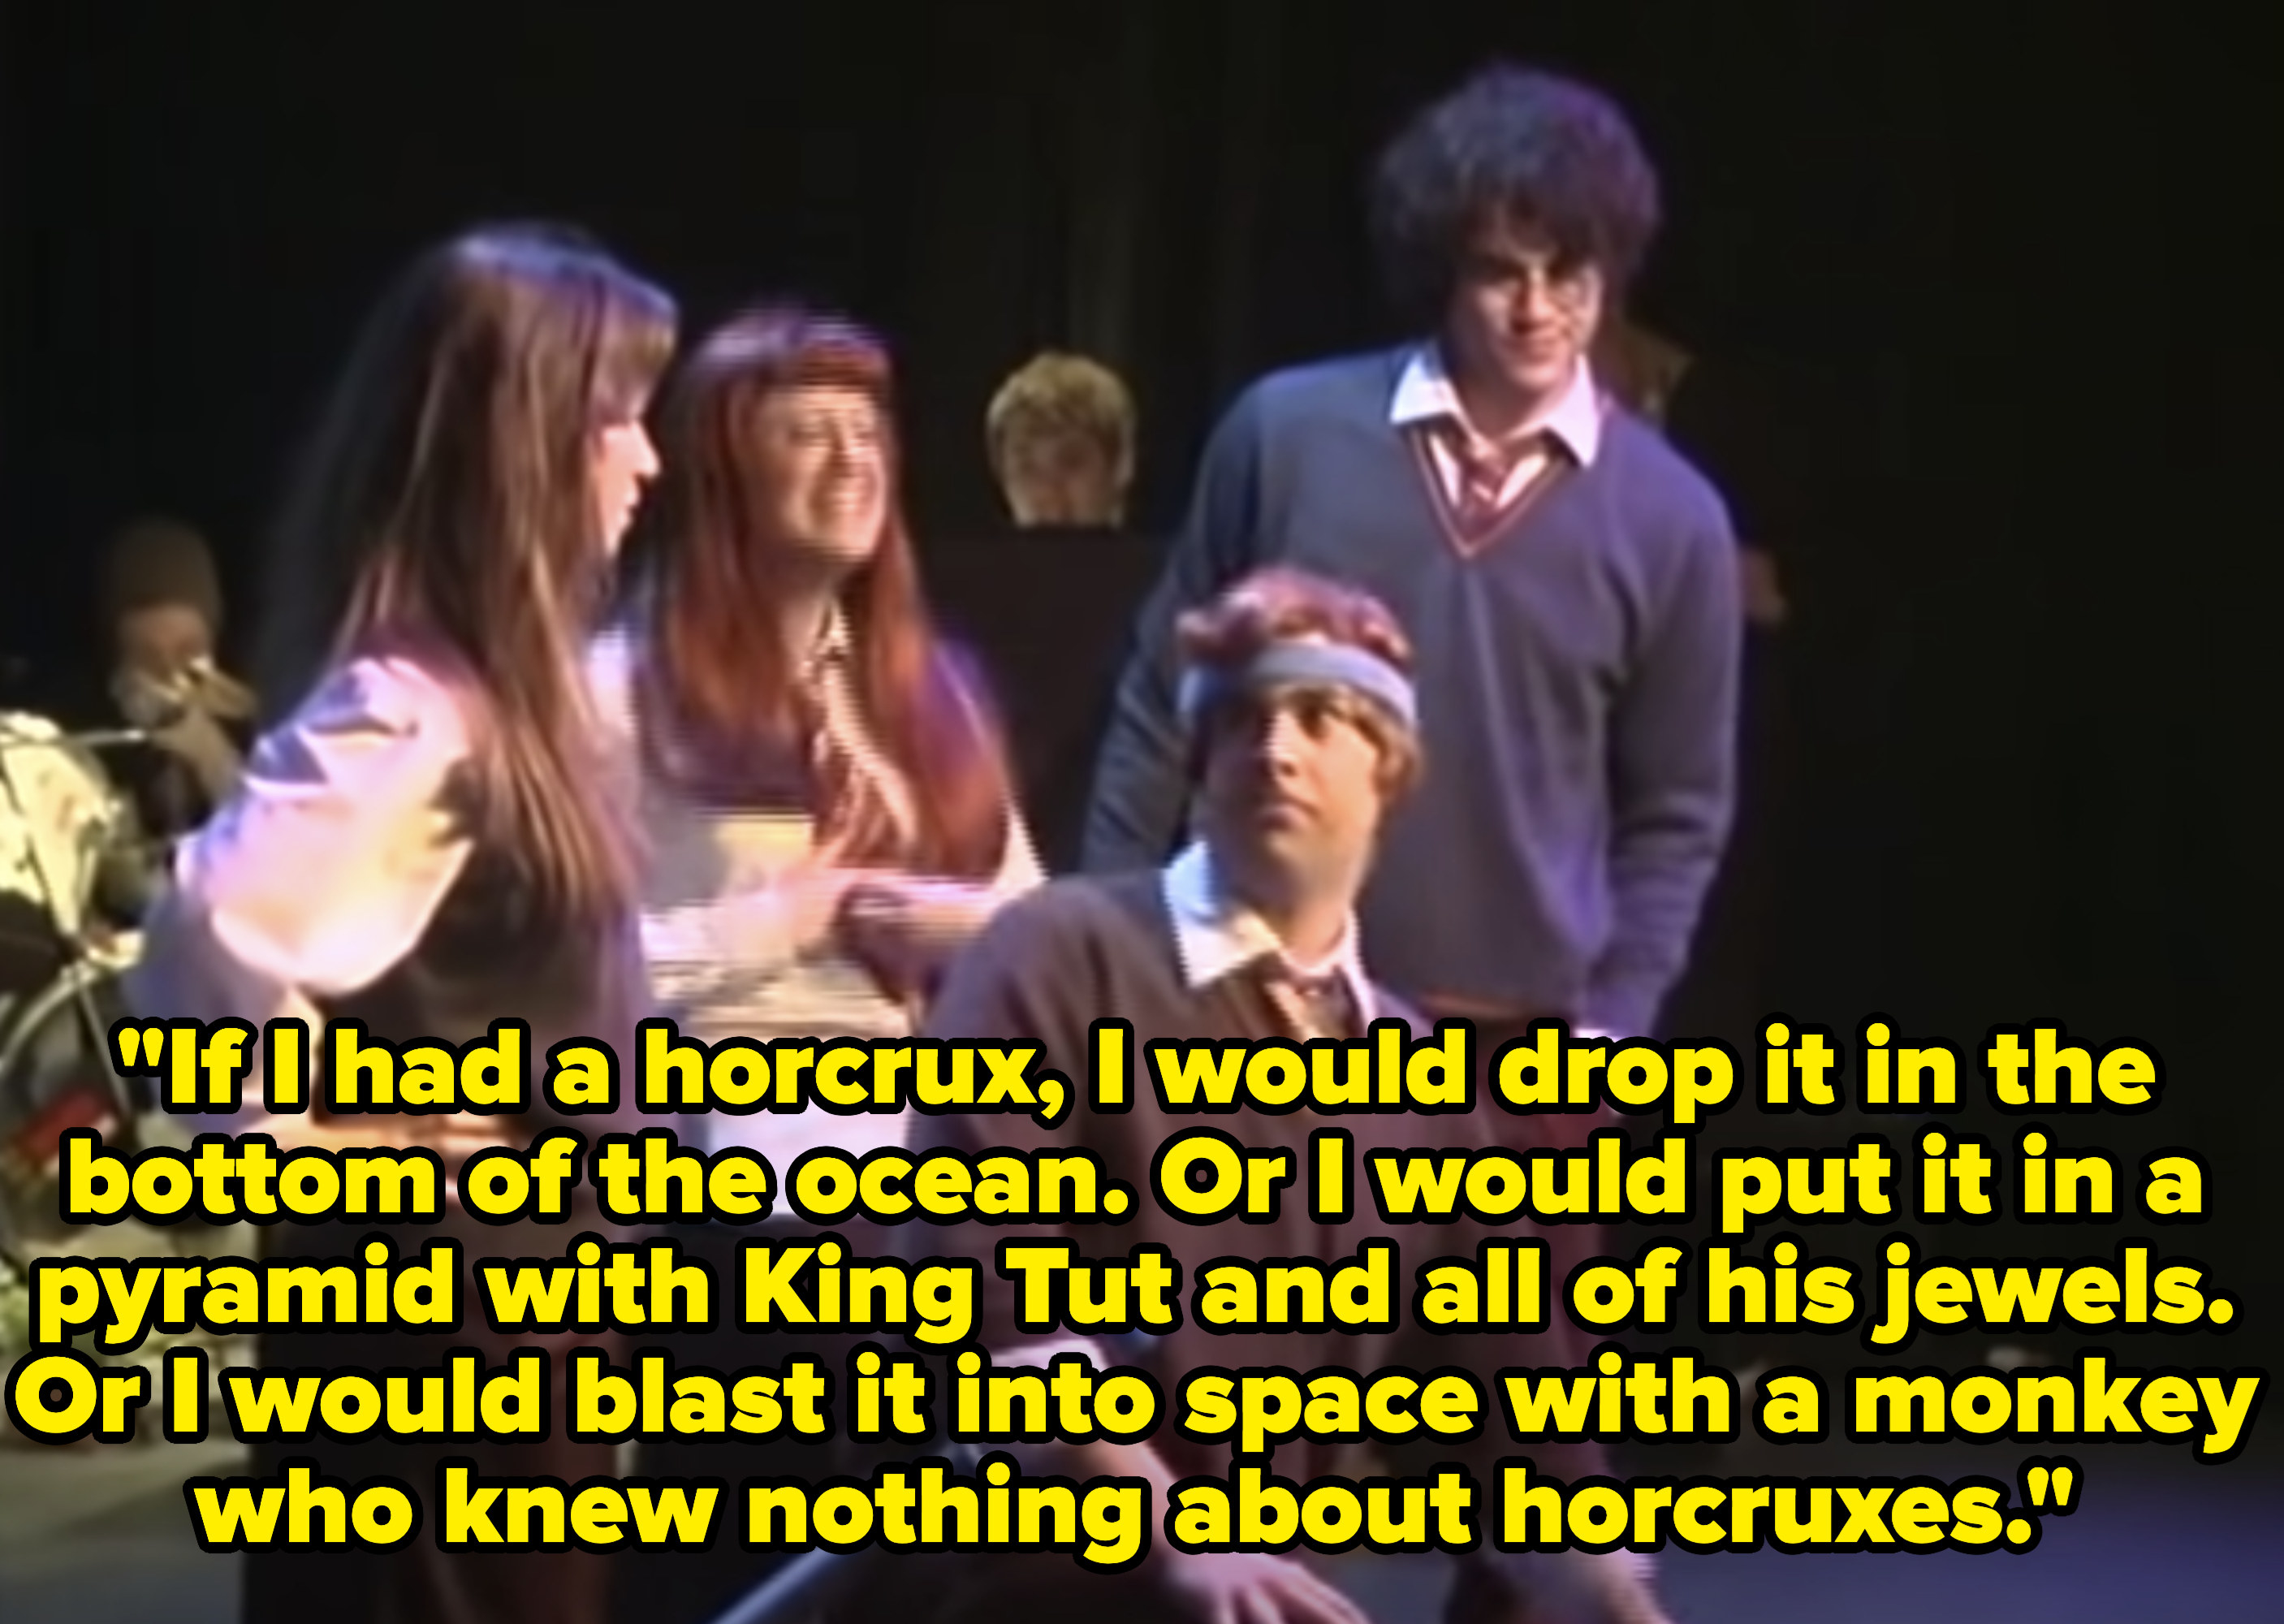 Ron: &quot;If I had a horcrux, I would drop it in the bottom of the ocean. Or I would put it in a pyramid with King Tut and all of his jewels. Or I would blast it into space with a monkey who knew nothing about horcruxes&quot;